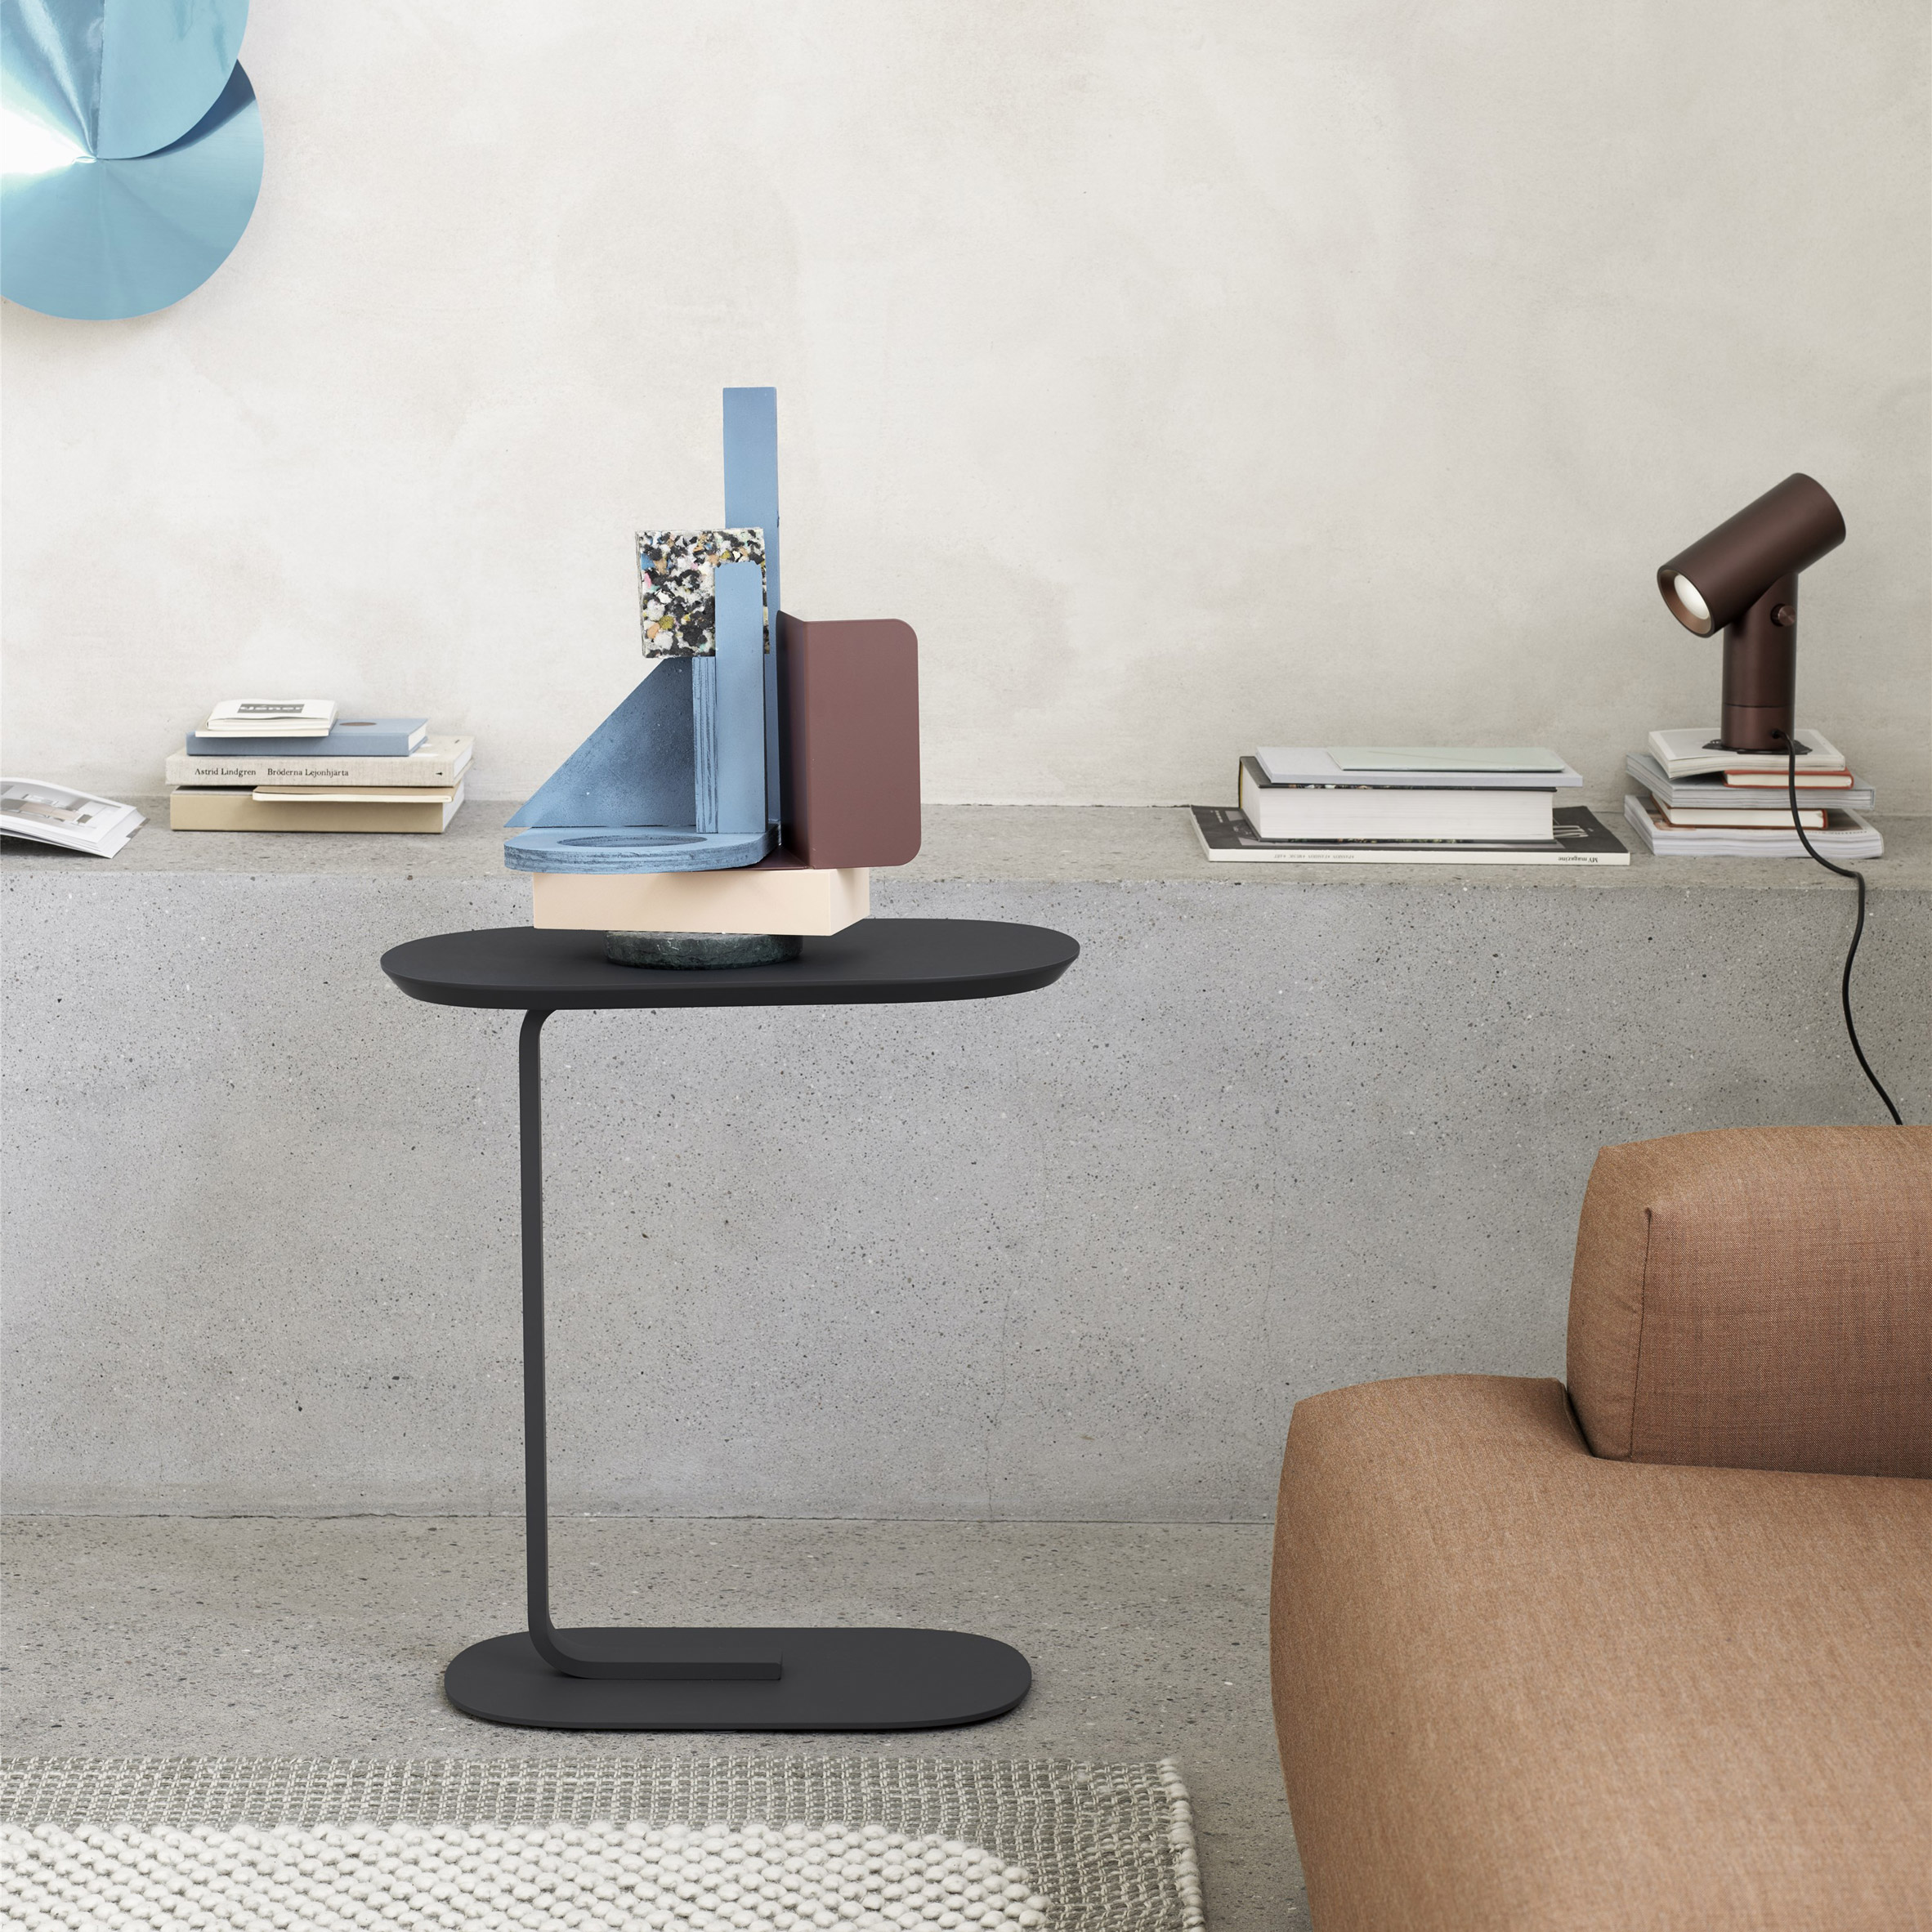 Home office furniture essentials: Relate Side Table by Big-Game for Muuto